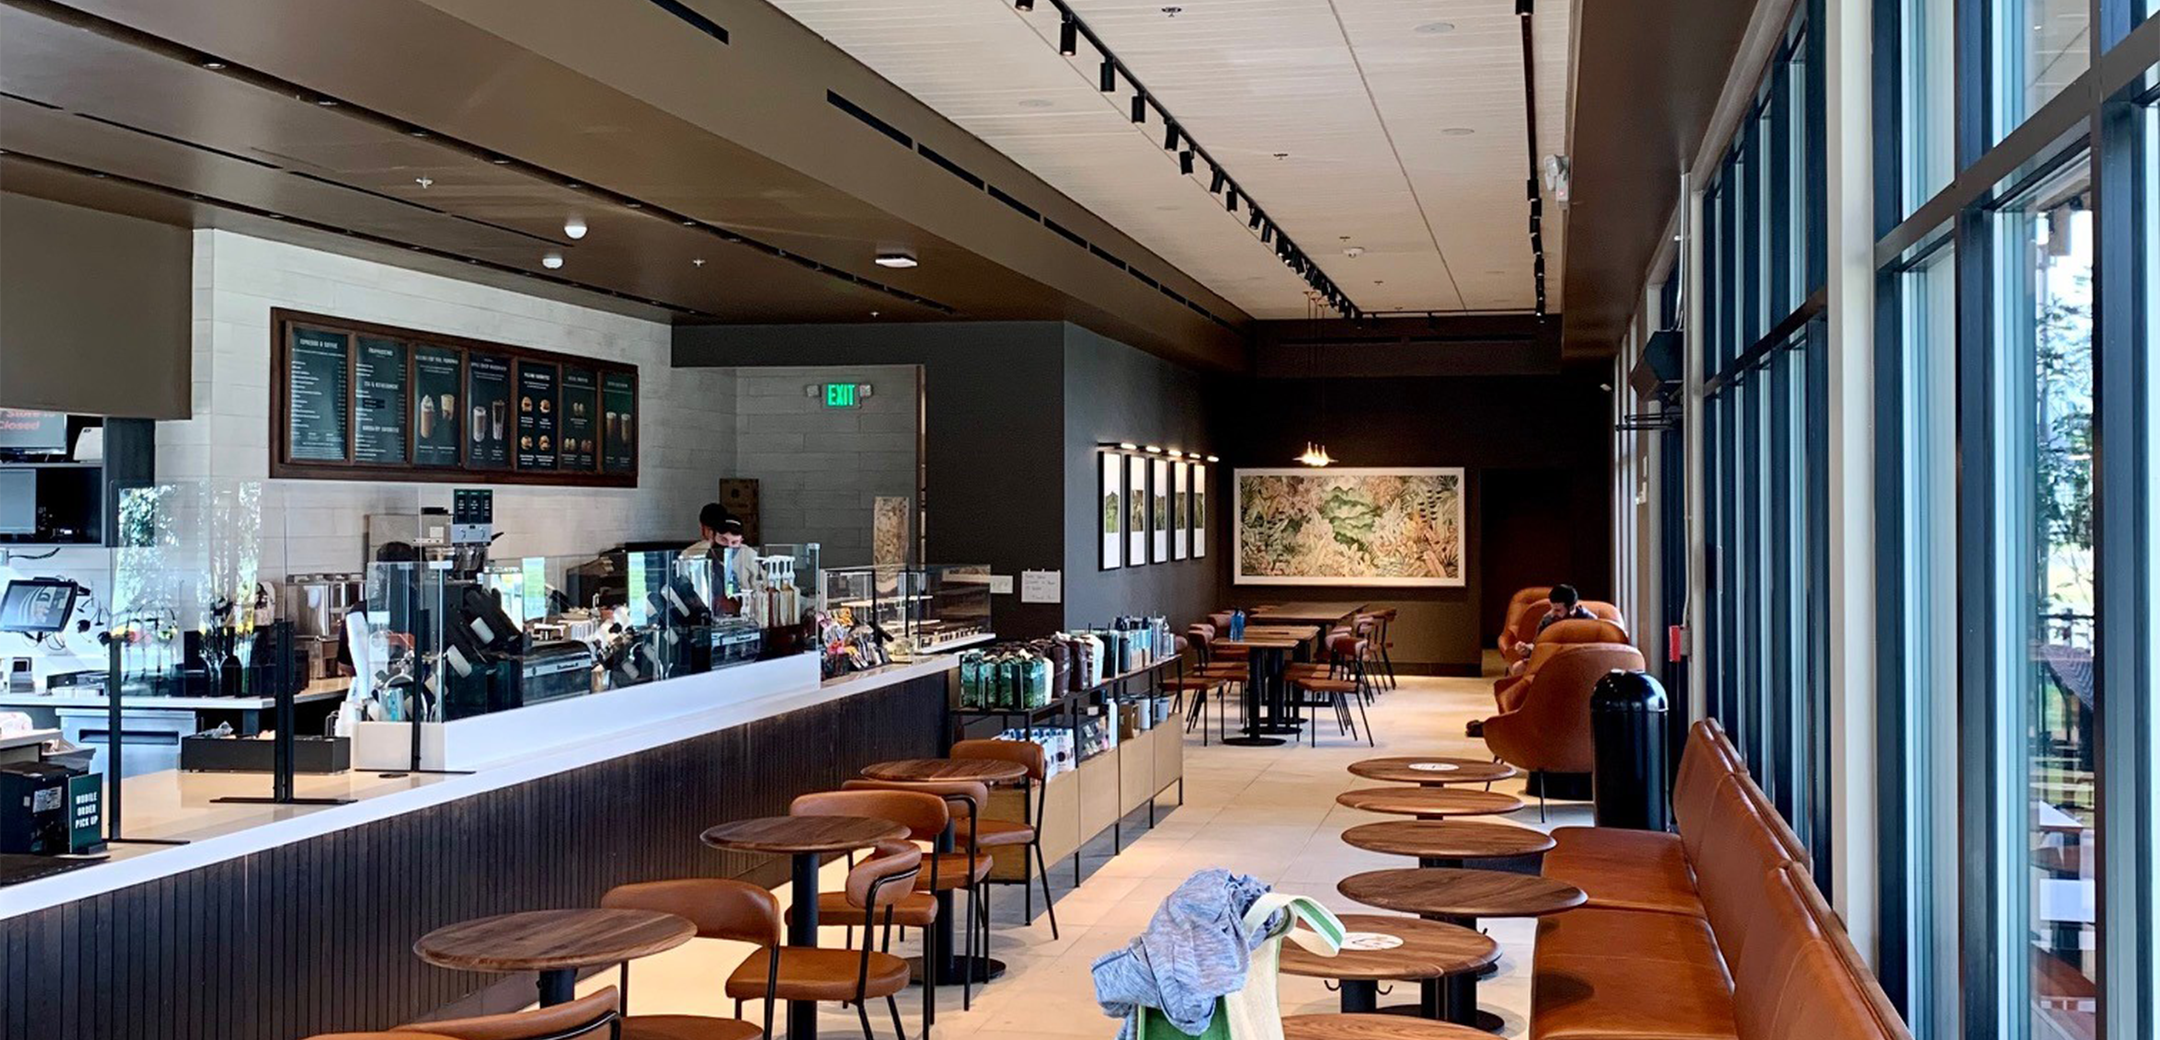 The interior view of the Starbucks seating area and bar counter, showcasing the leather seats attached to the glass window and wooden tables along the wall.